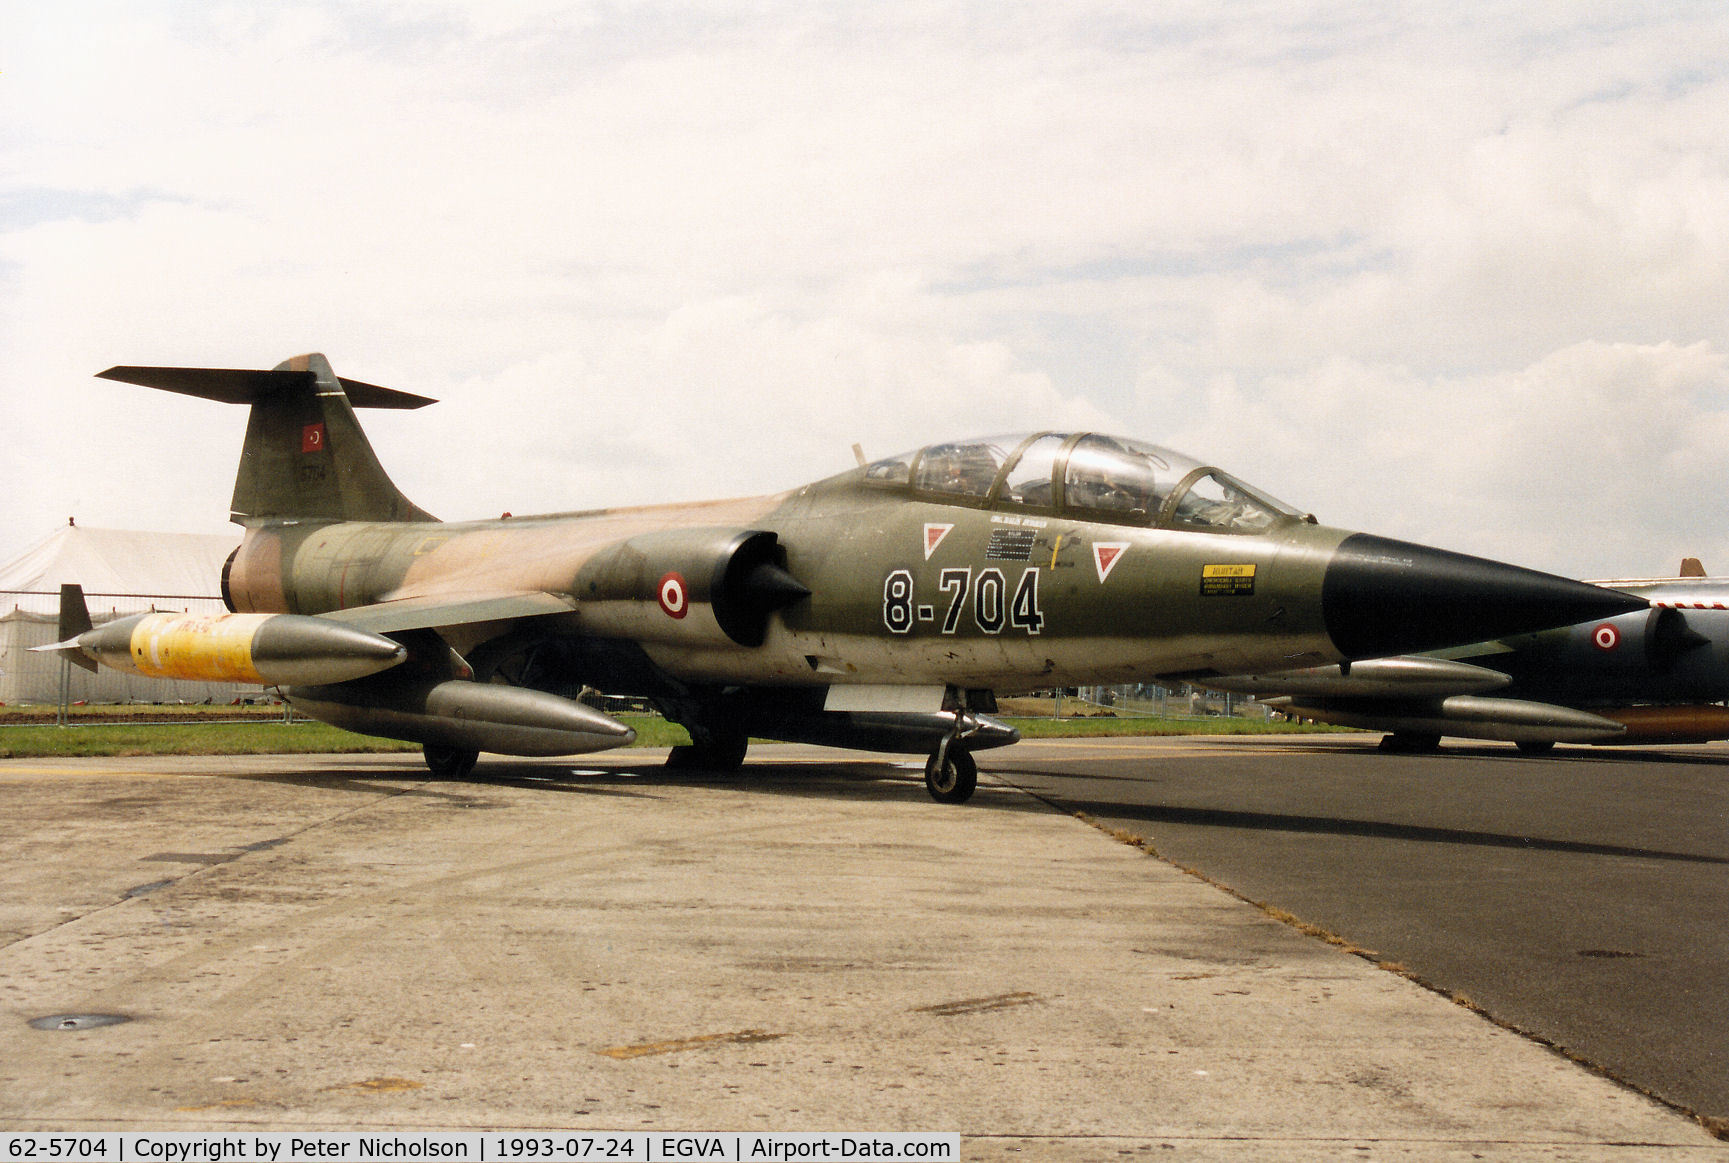 62-5704, 1962 Lockheed TF-104G Starfighter C/N 583D-5704, TF-104G Starfighter of 181 Filo Turkish Air Force on display at the 1993 Intnl Air Tattoo at RAF Fairford.